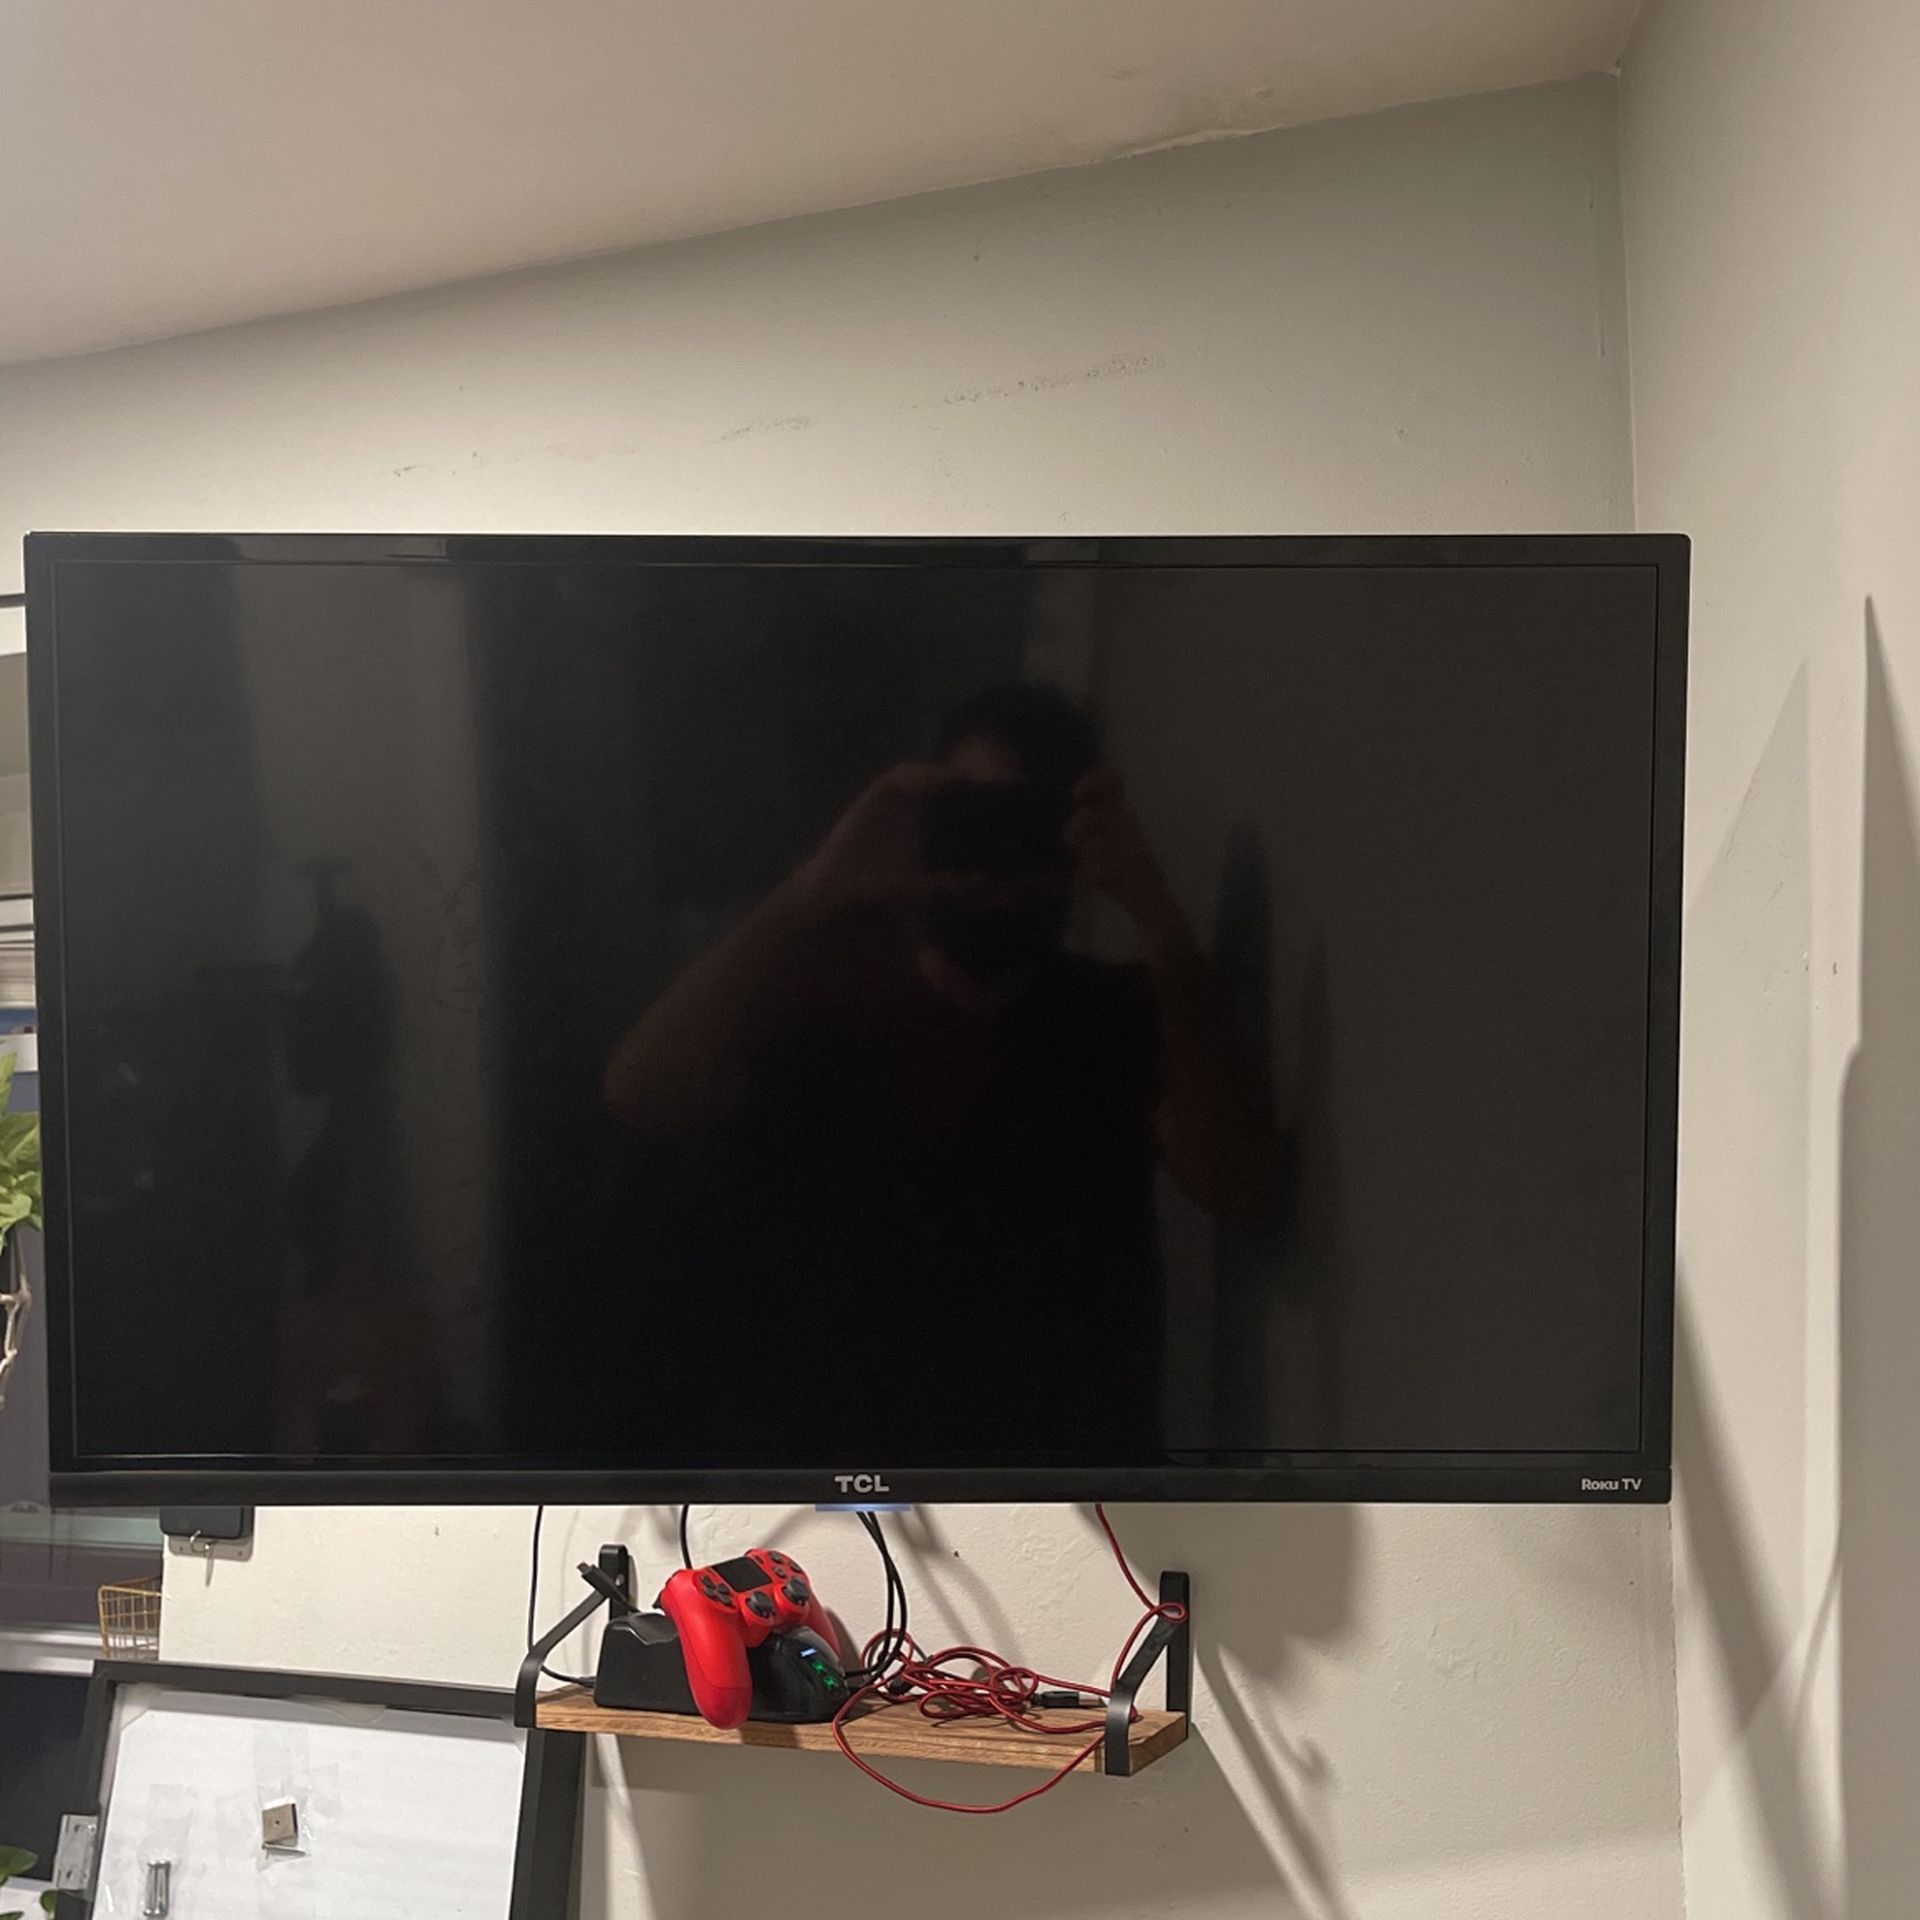 32 Inch TCL Roku Tv With Full Pivot Wall Mount  120$  Or Best Offer.